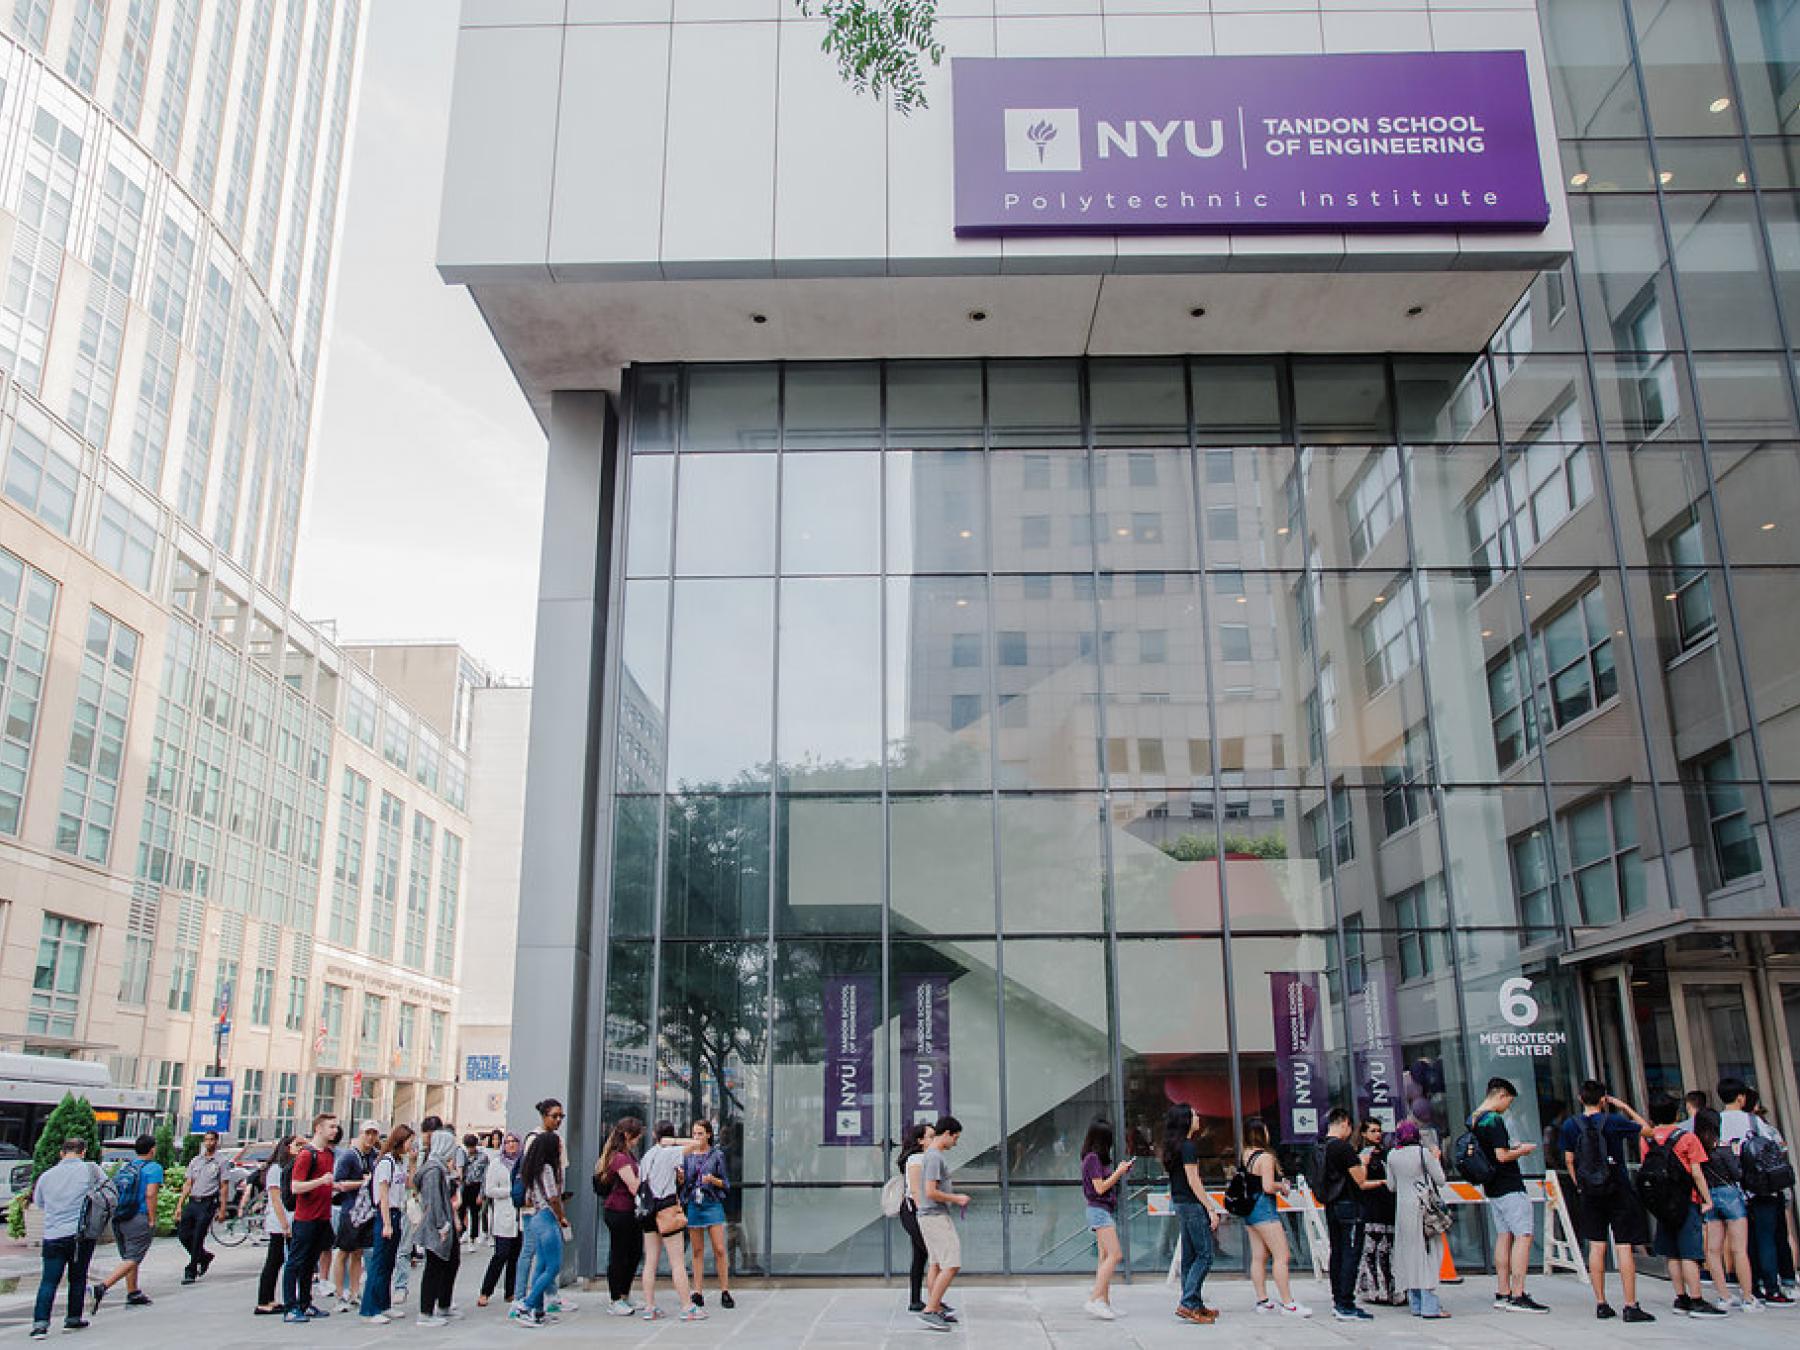 nyu visit in person